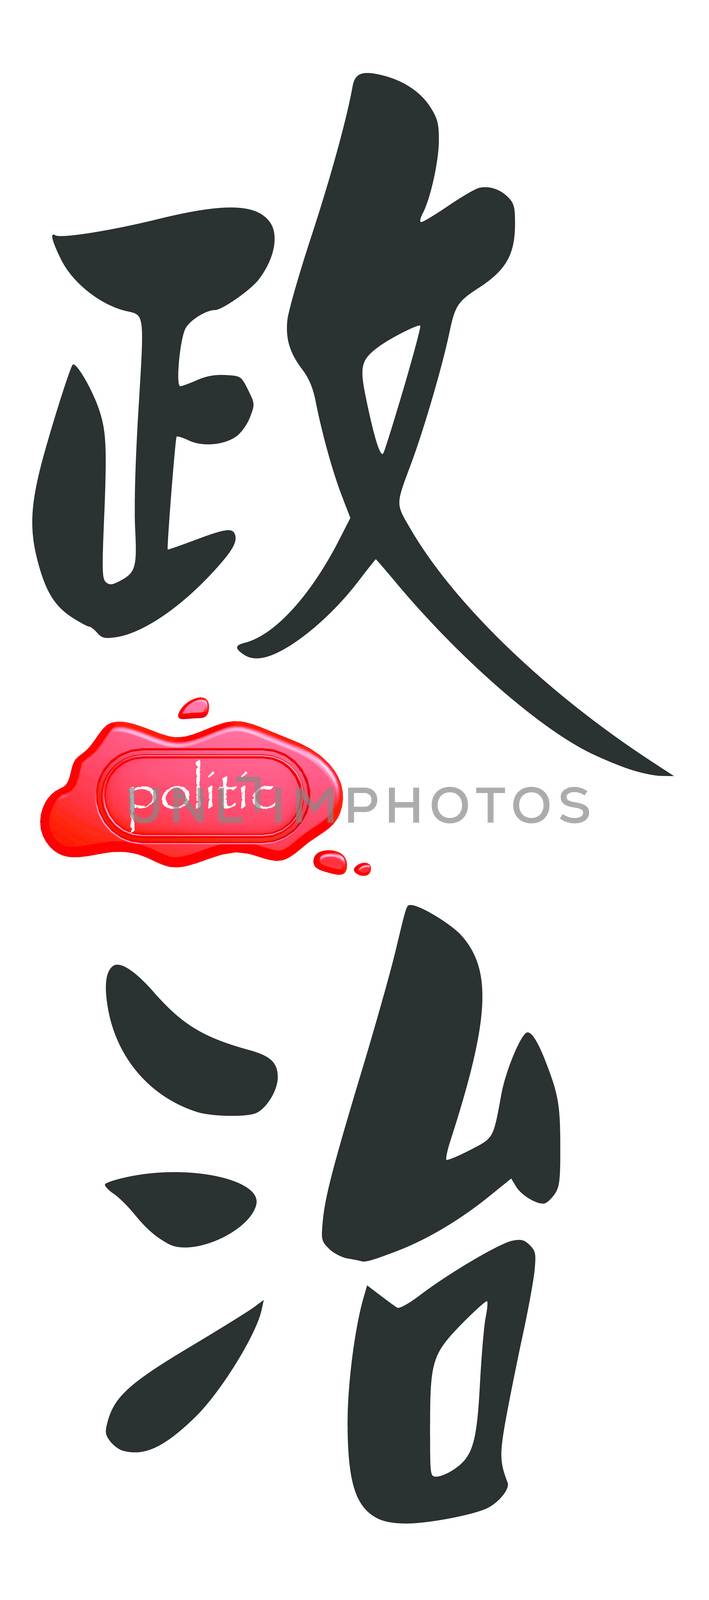 Politic in Chinese